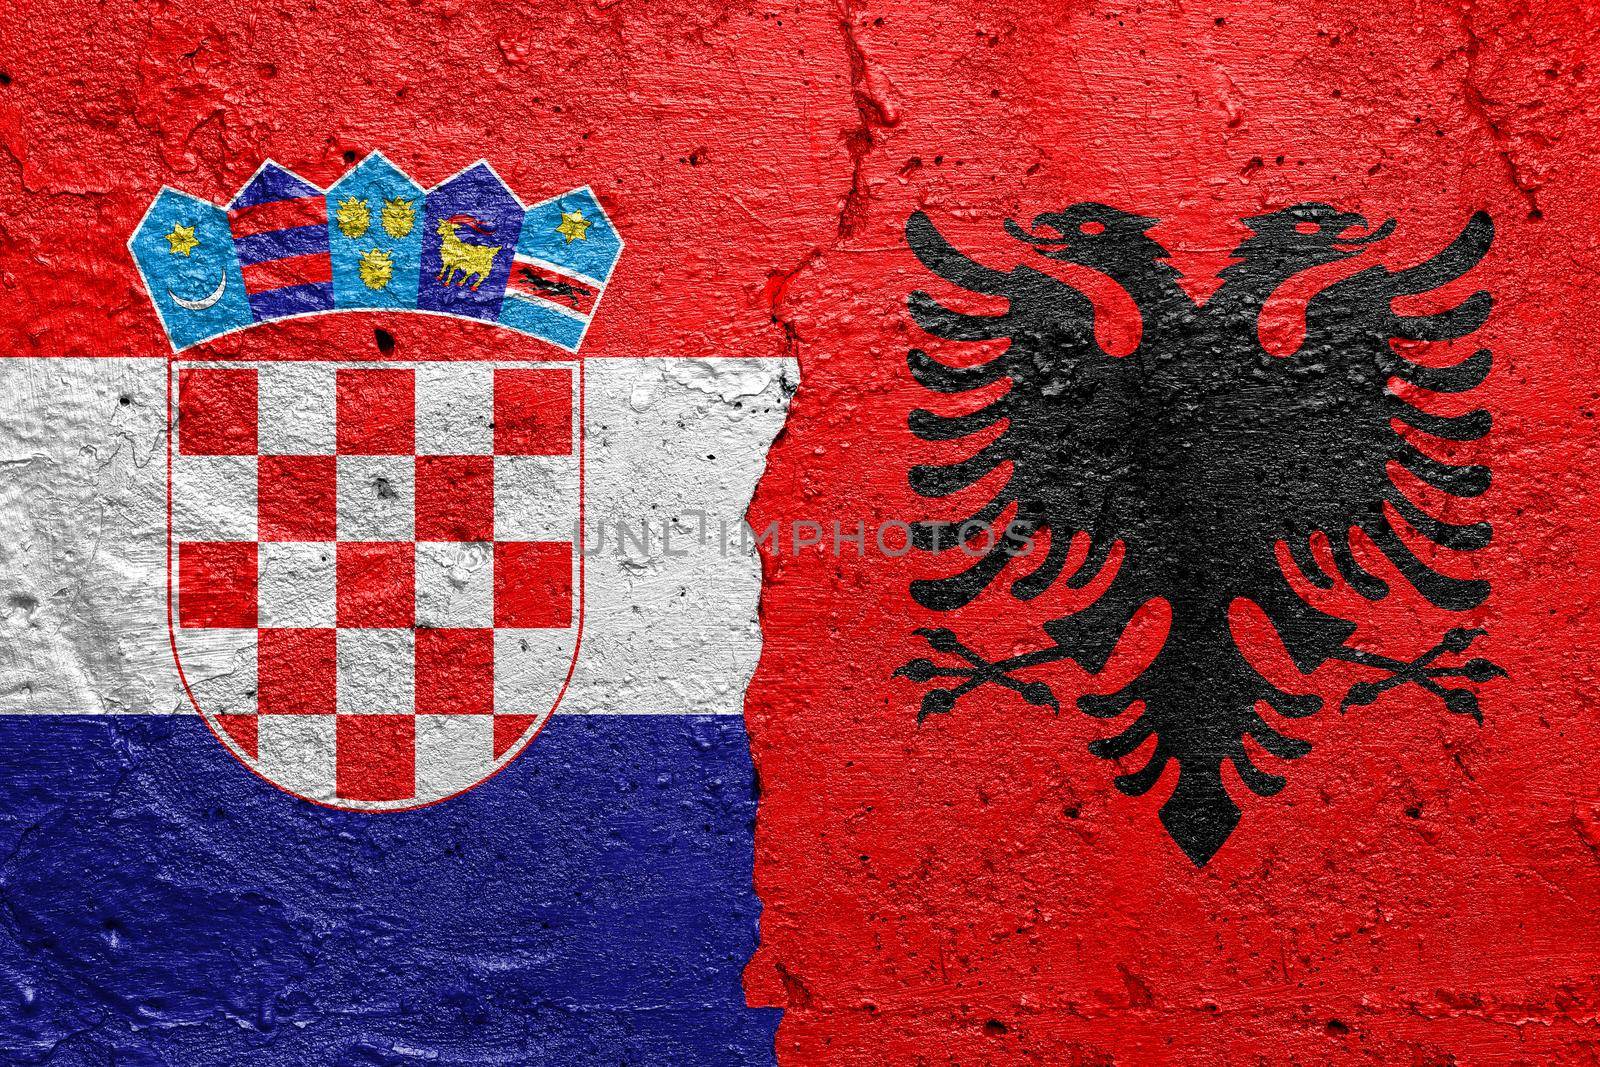 Croatia and Albania - Cracked concrete wall painted with a Croatian flag on the left and a Albanian flag on the right stock photo by adamr